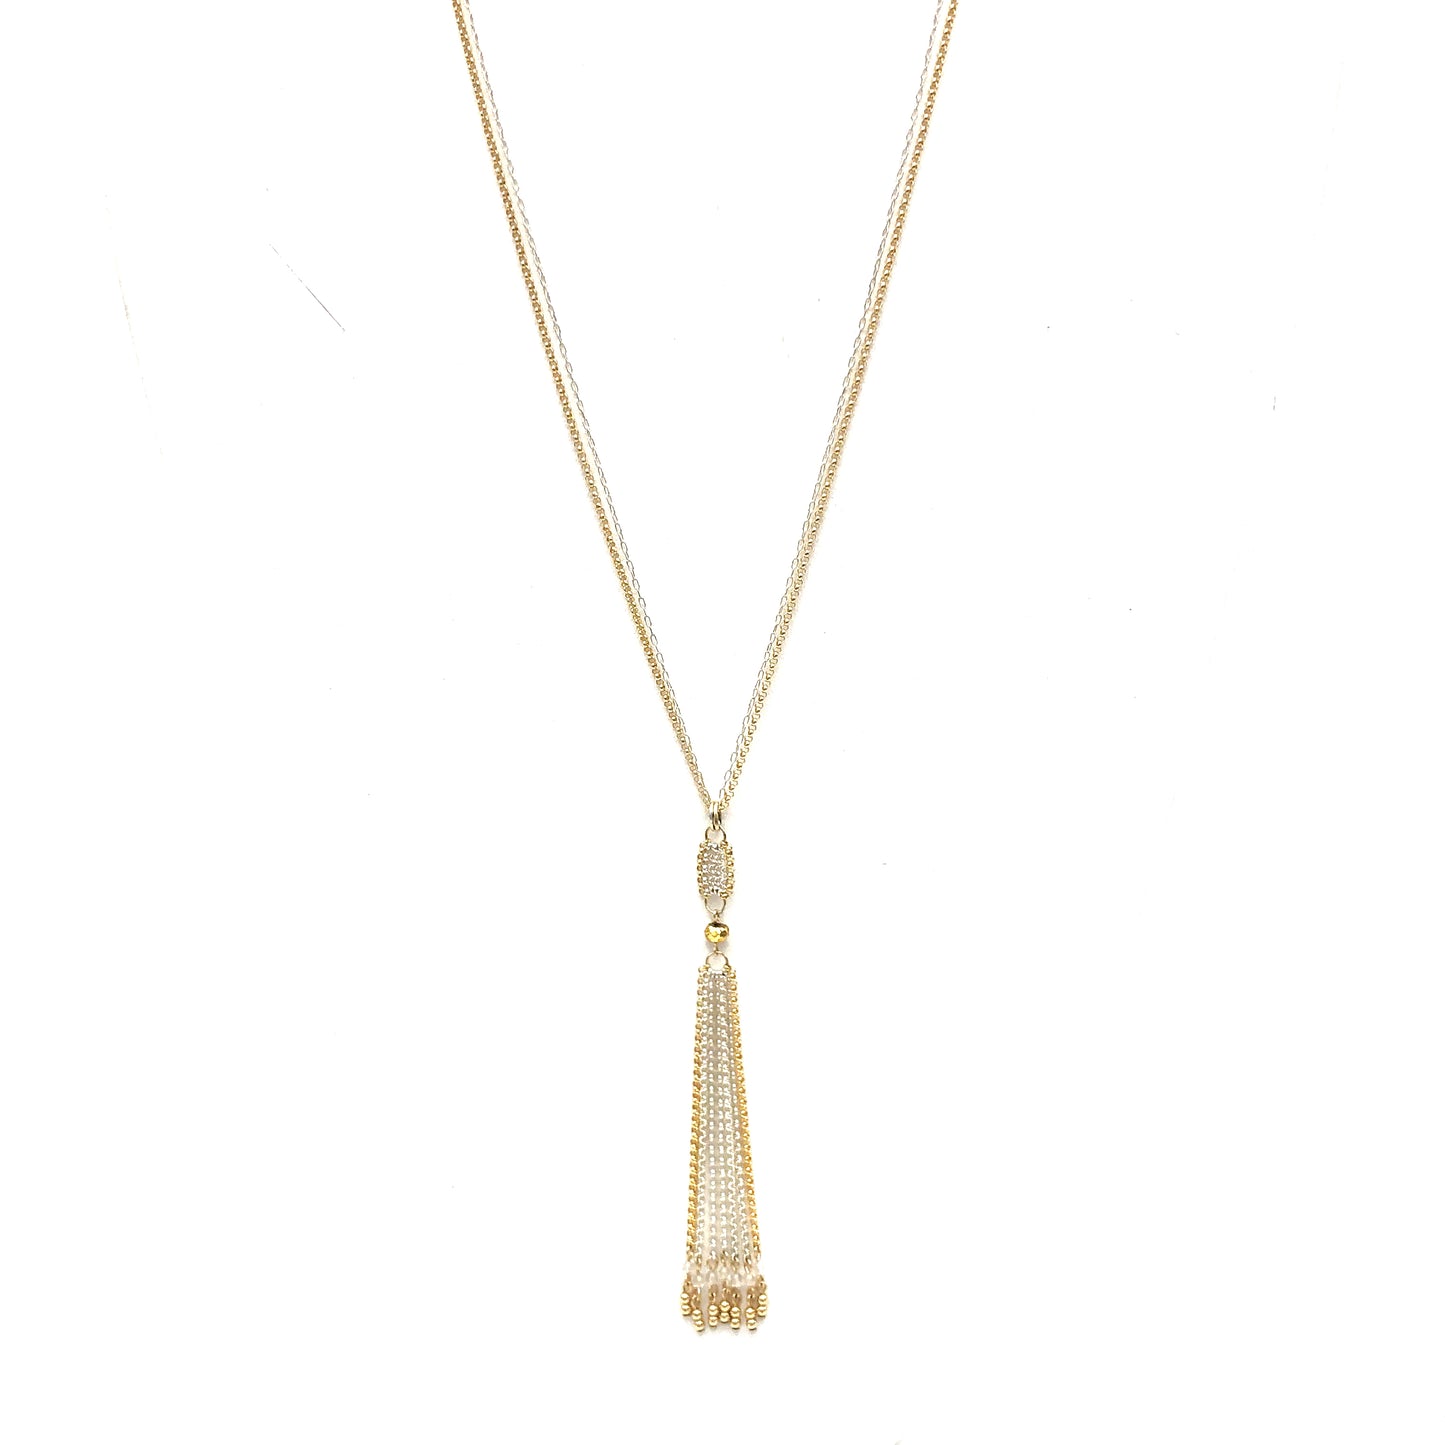 Silver + Gold Tassel Necklace with Pyrite Accents